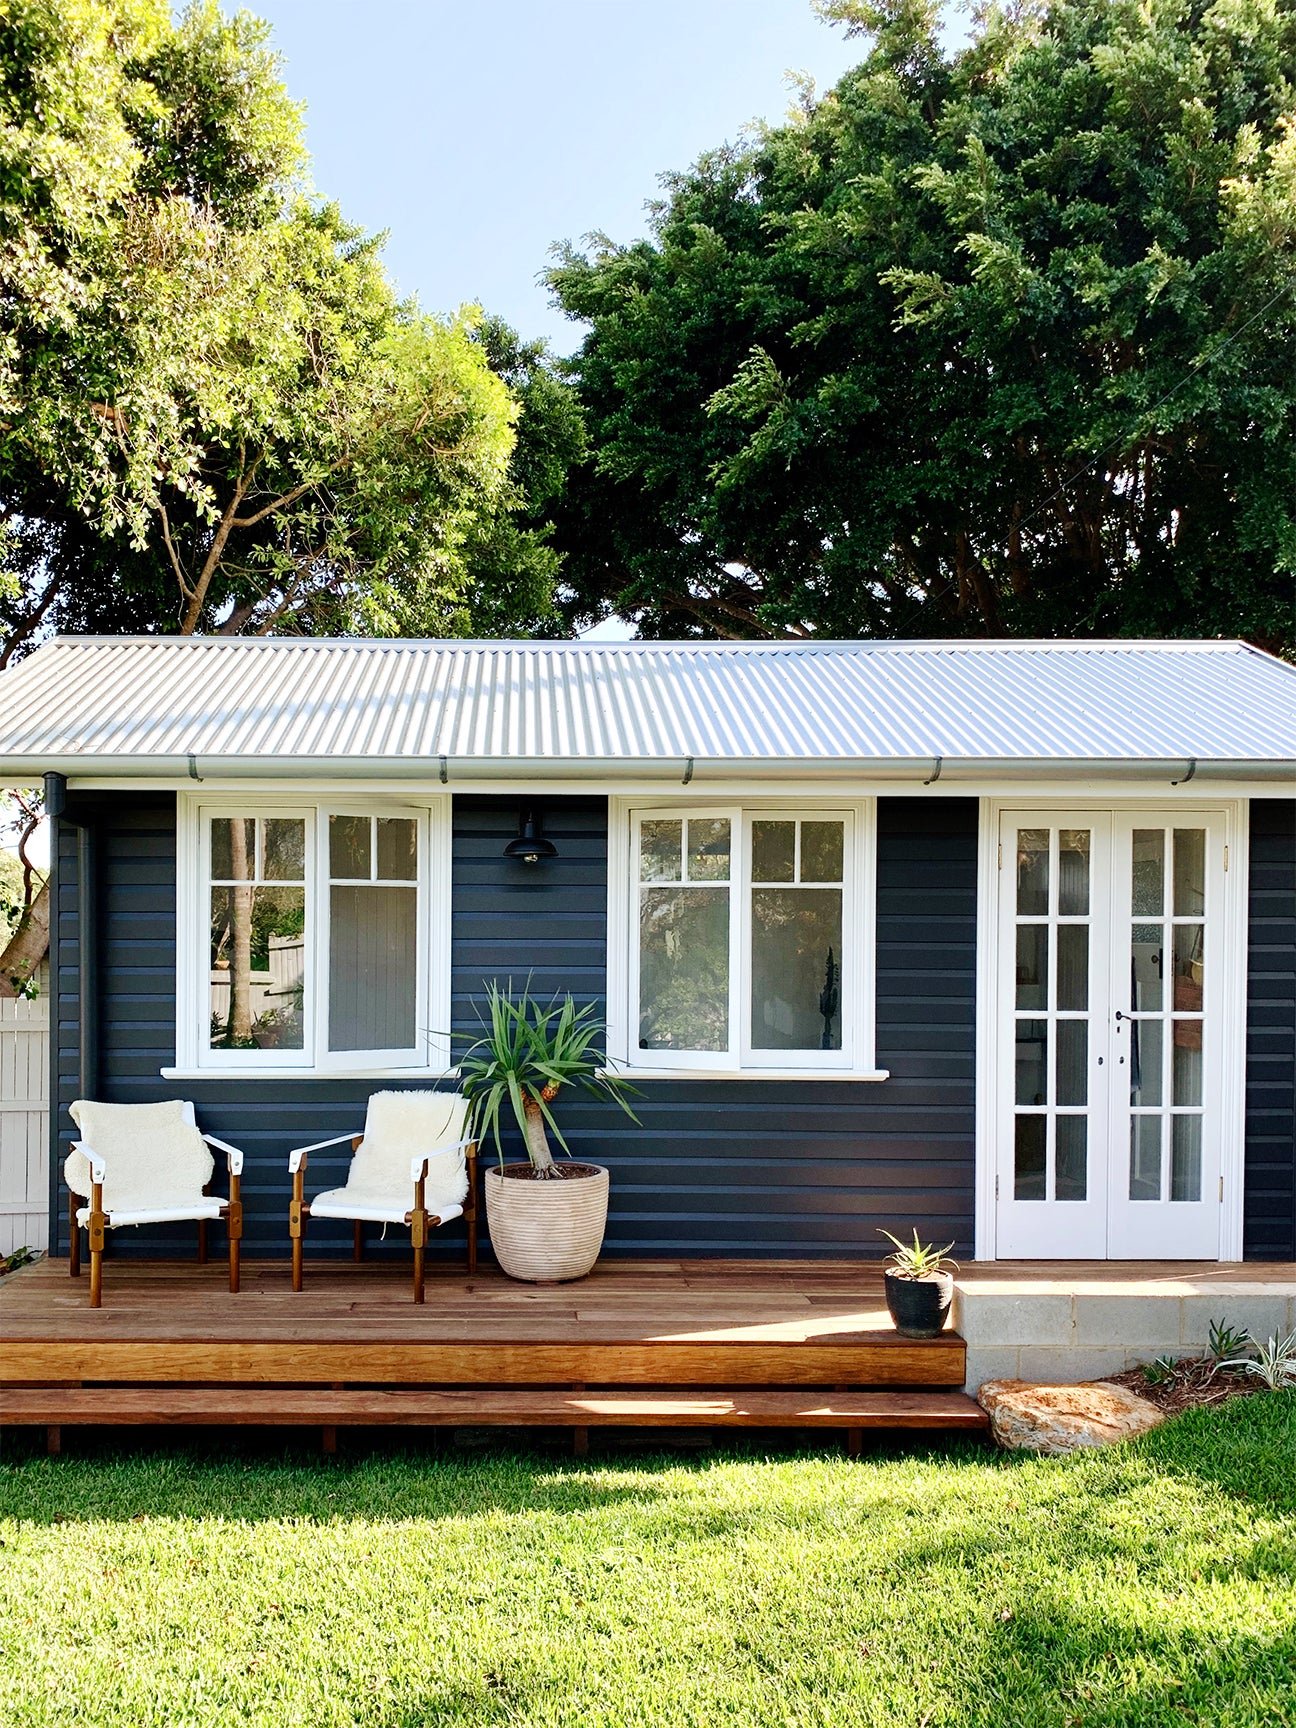 Courtney Adamo Made a Backyard Shed the Hardest-Working Space in Her Home